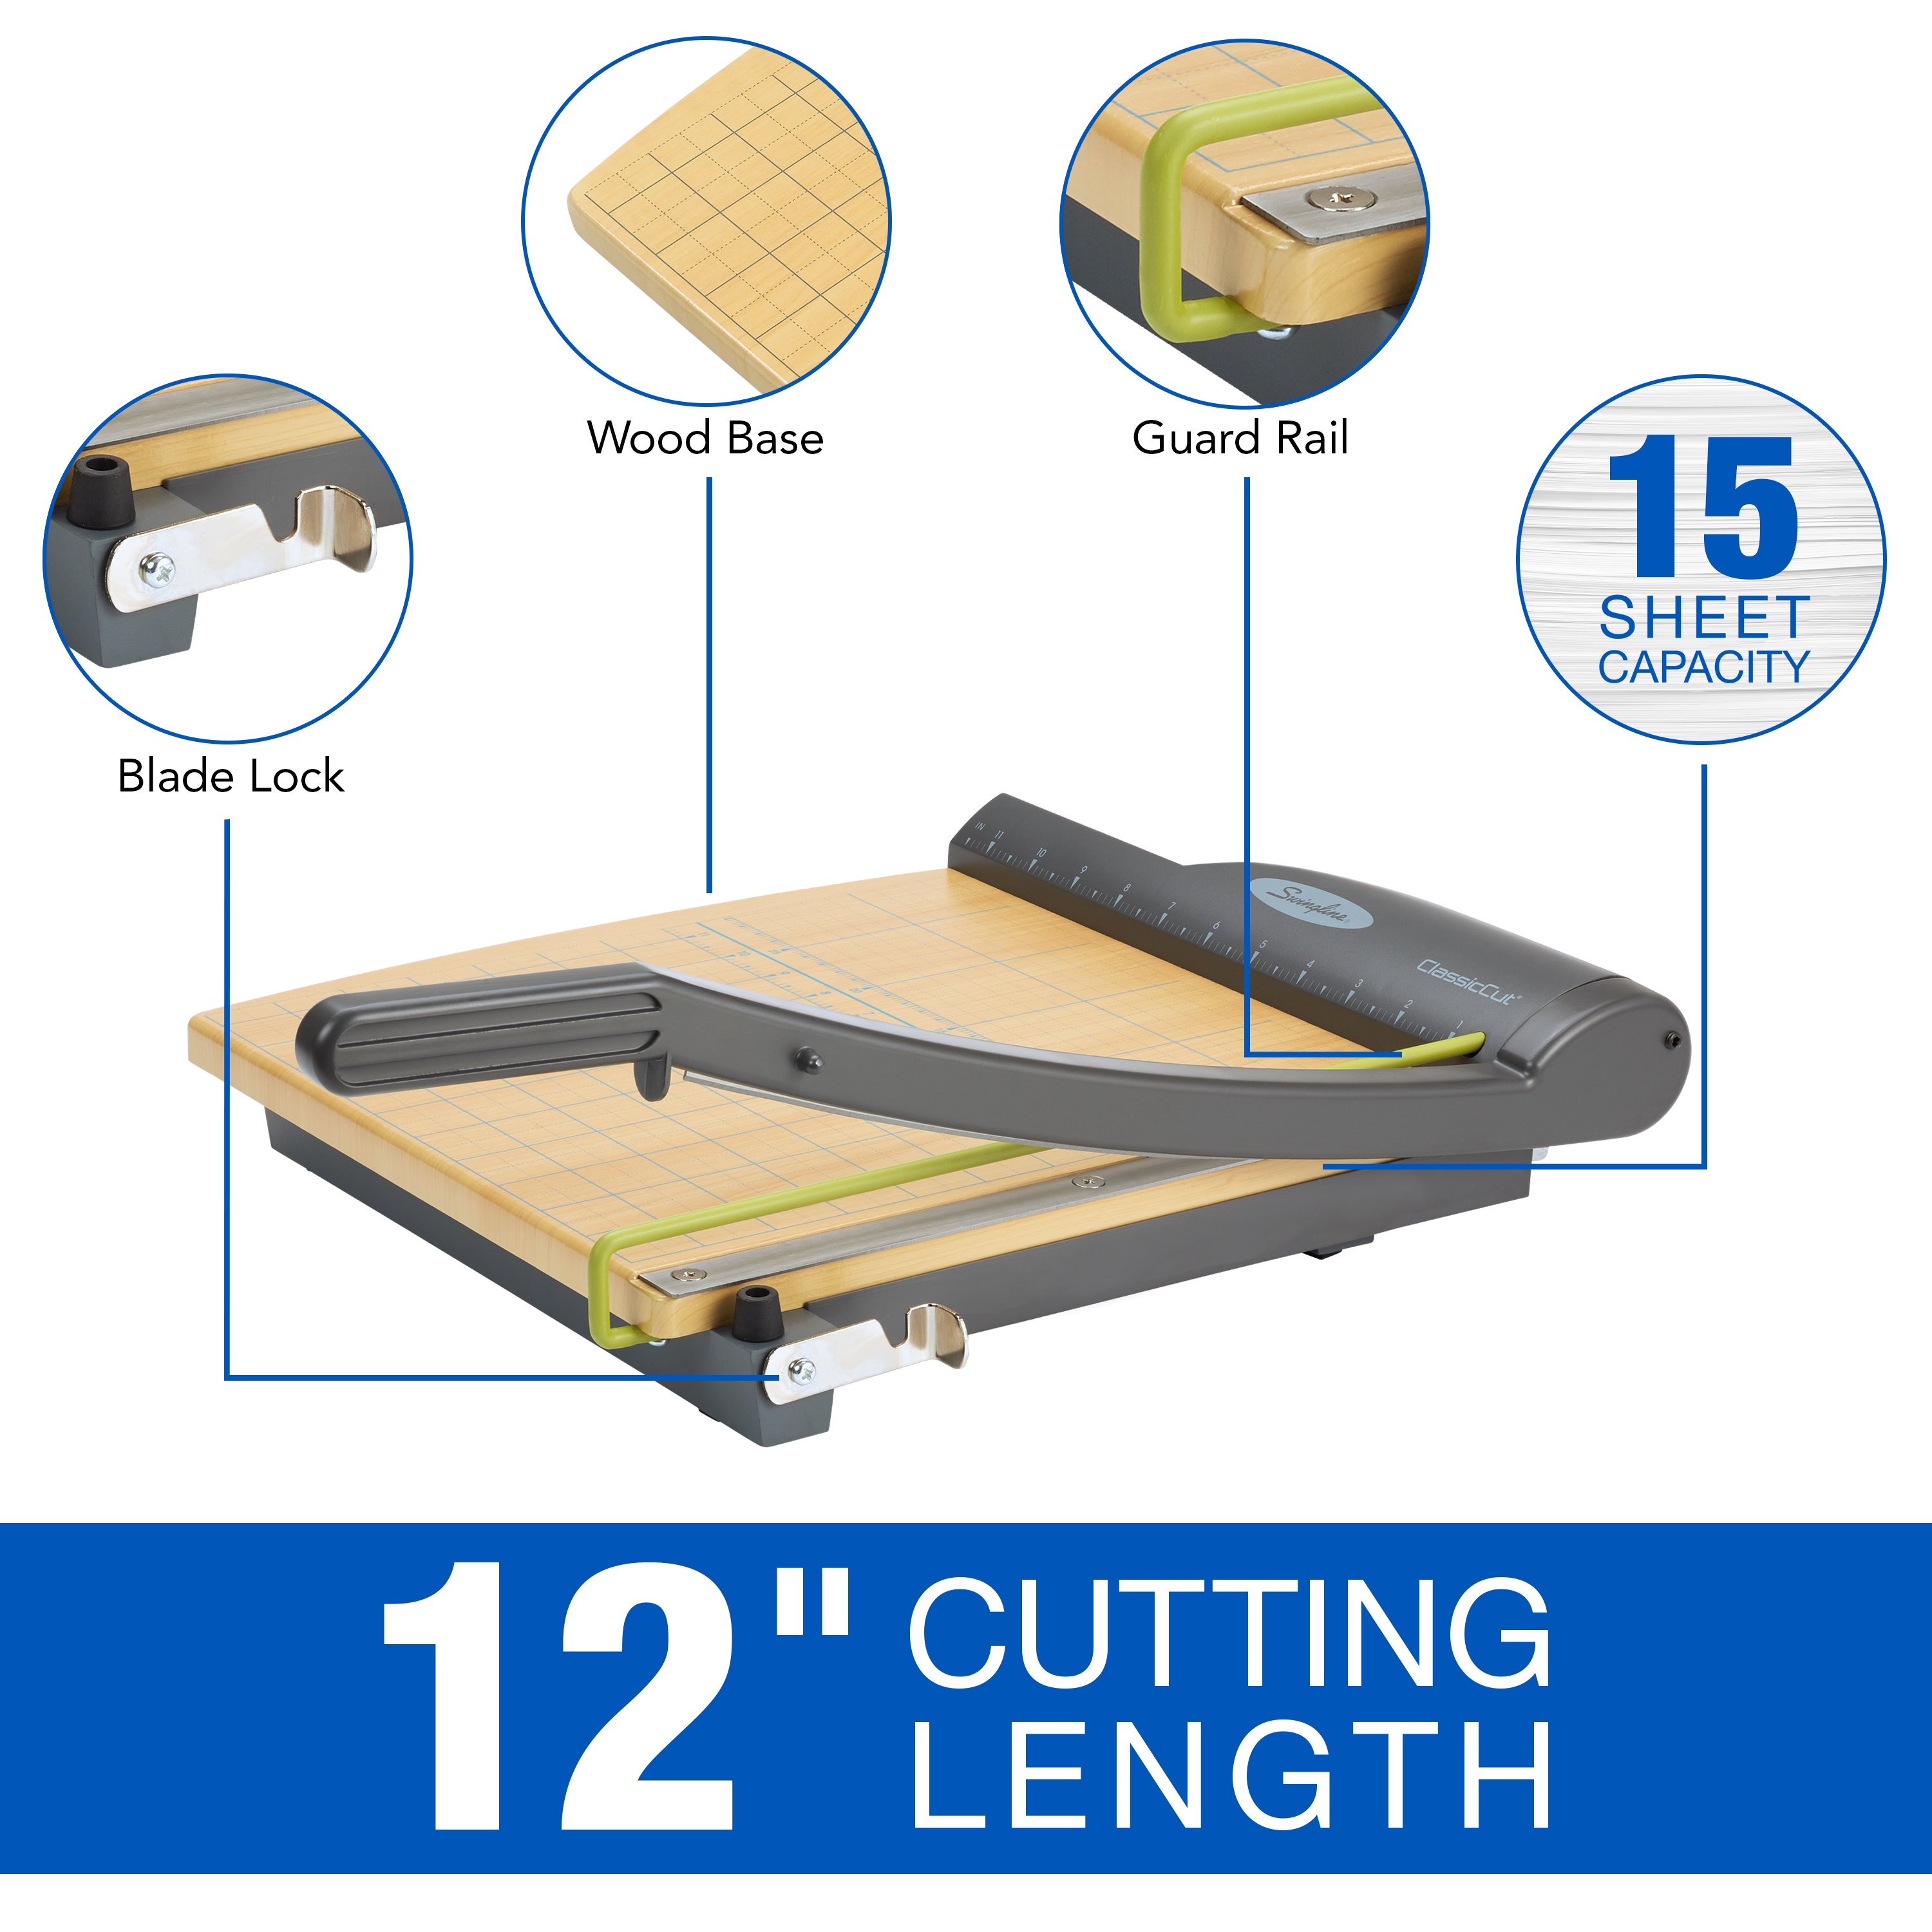 Swingline ClassicCut Pro Guillotine Trimmer, 12" Cut Length, 15 Sheets, Wood (9112A) - image 3 of 11